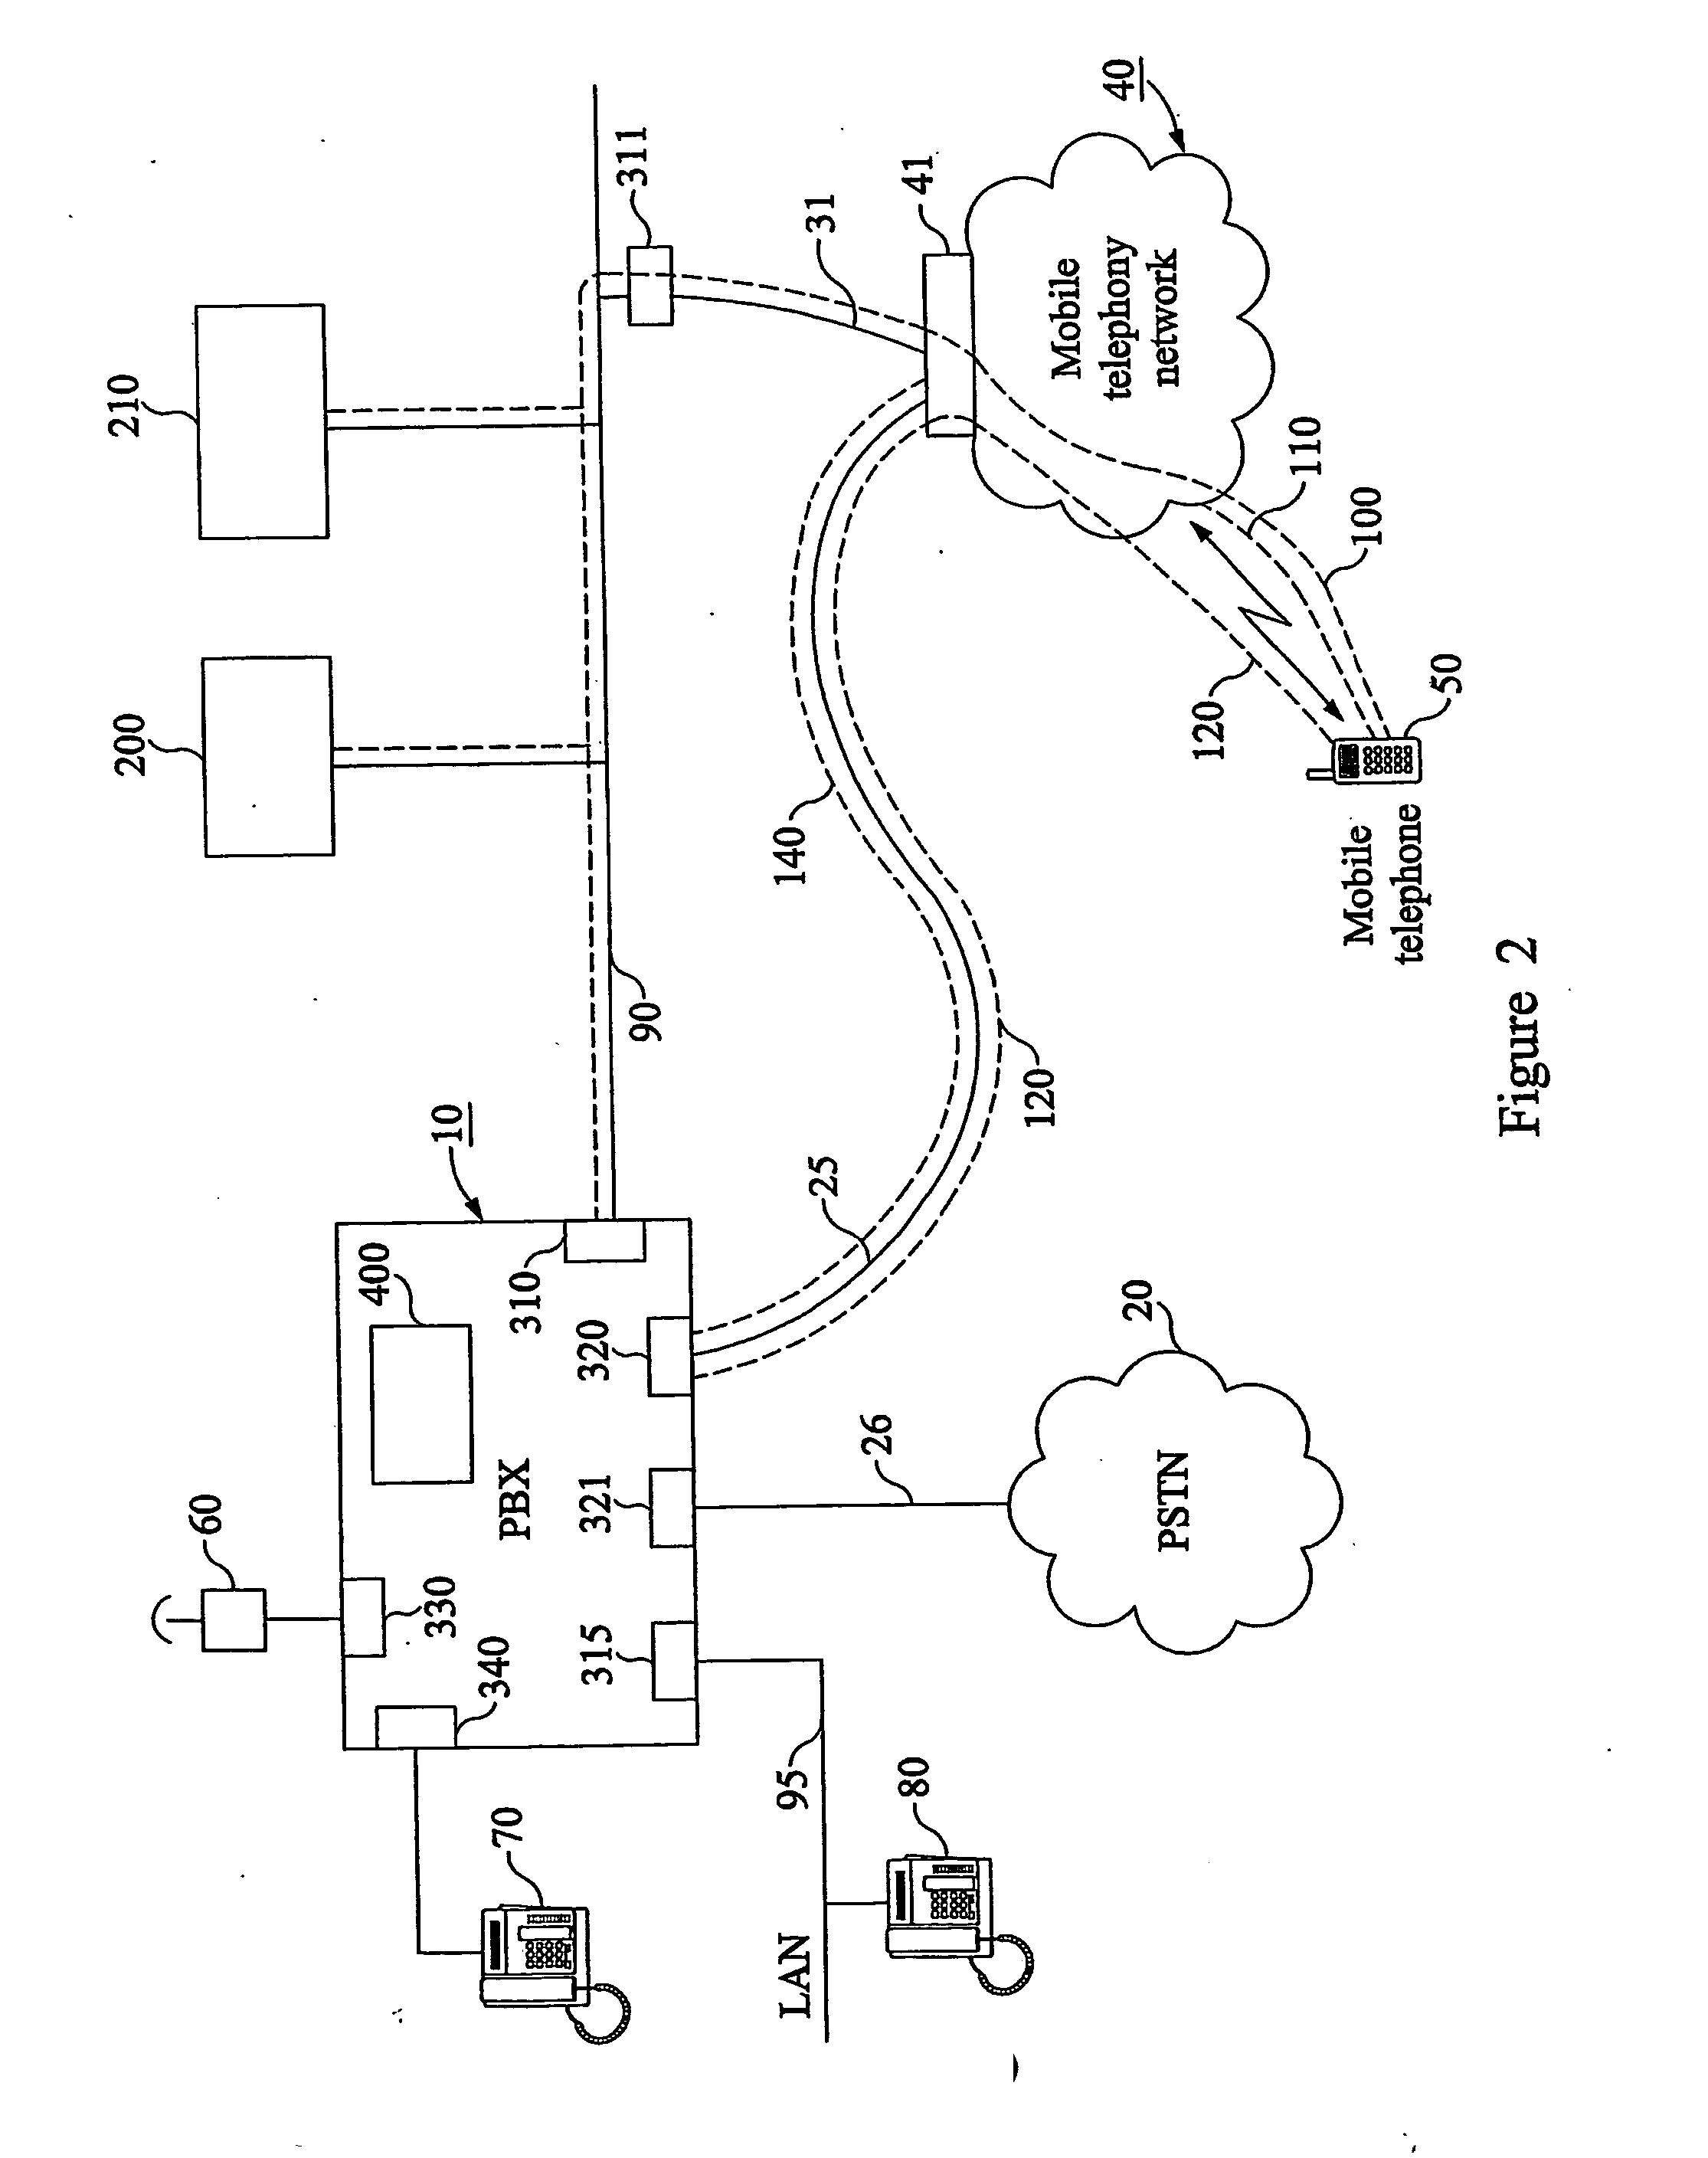 Method, apparatus and arrangement in a telecommunications network for providing control over and enabling advanced services and user interfaces in a mobile telephone